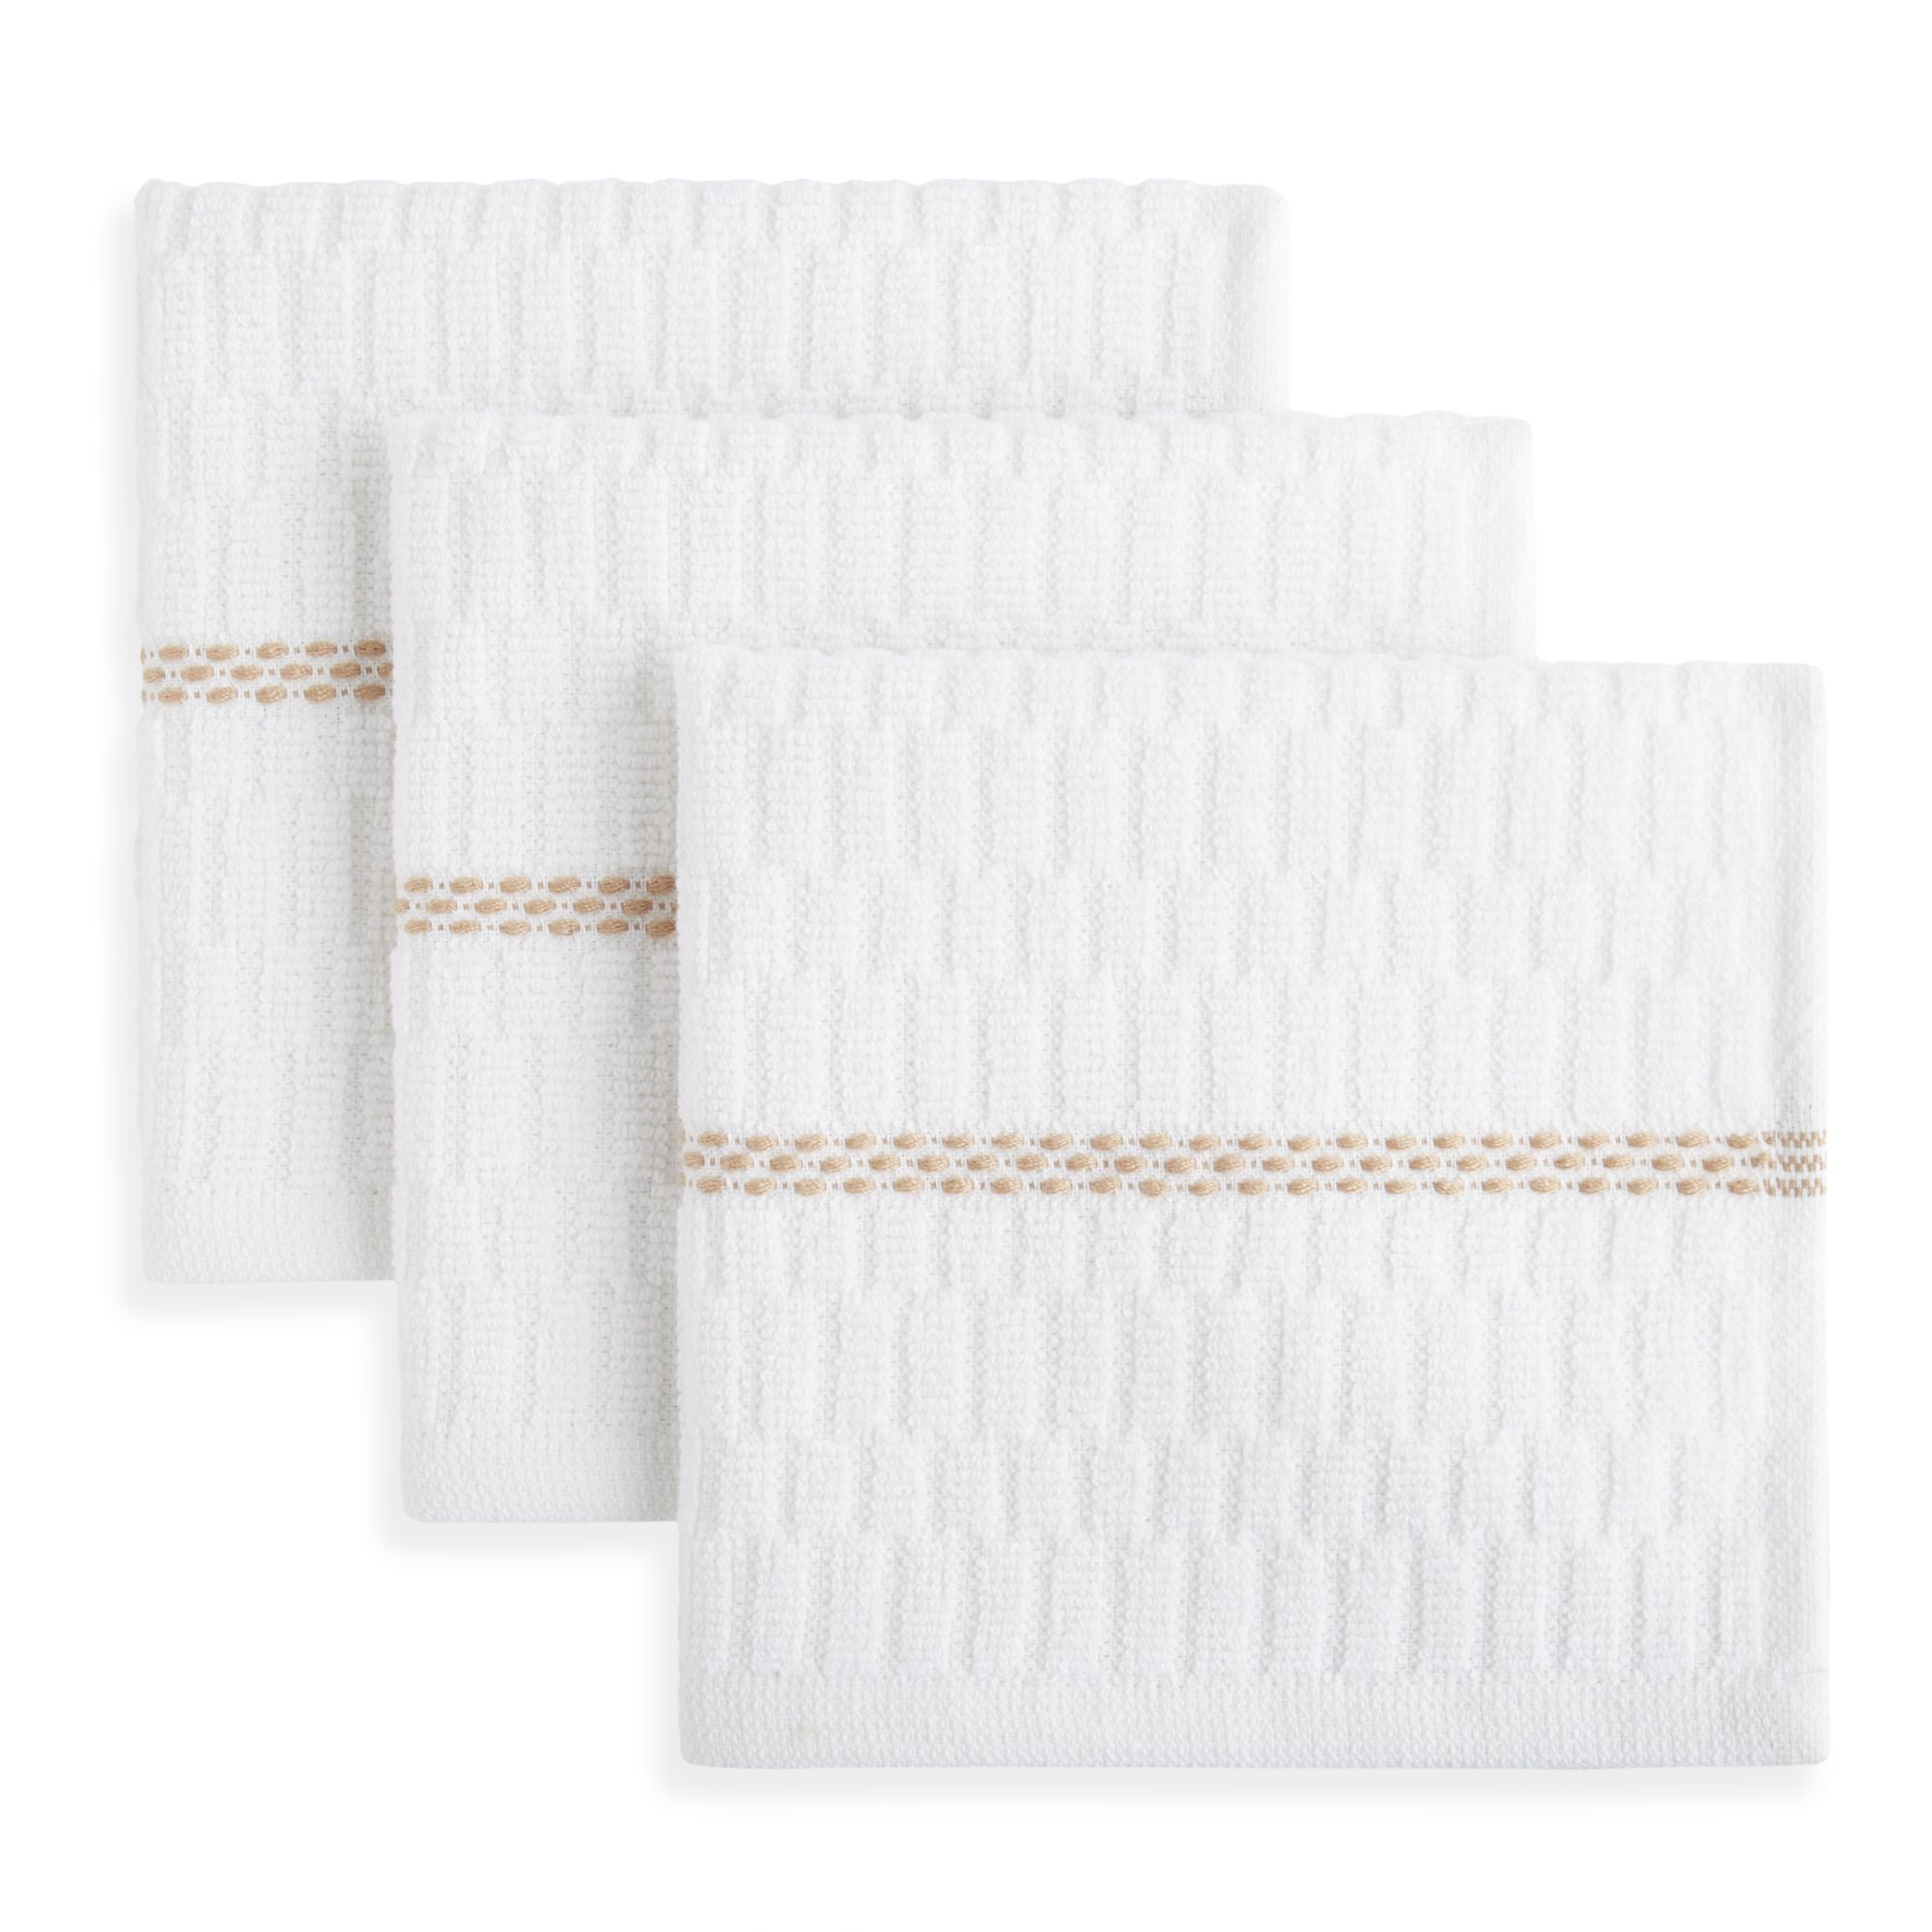 Jantex Dish Cloths Bleached (Pack of 10) - E944 - Buy Online at Nisbets